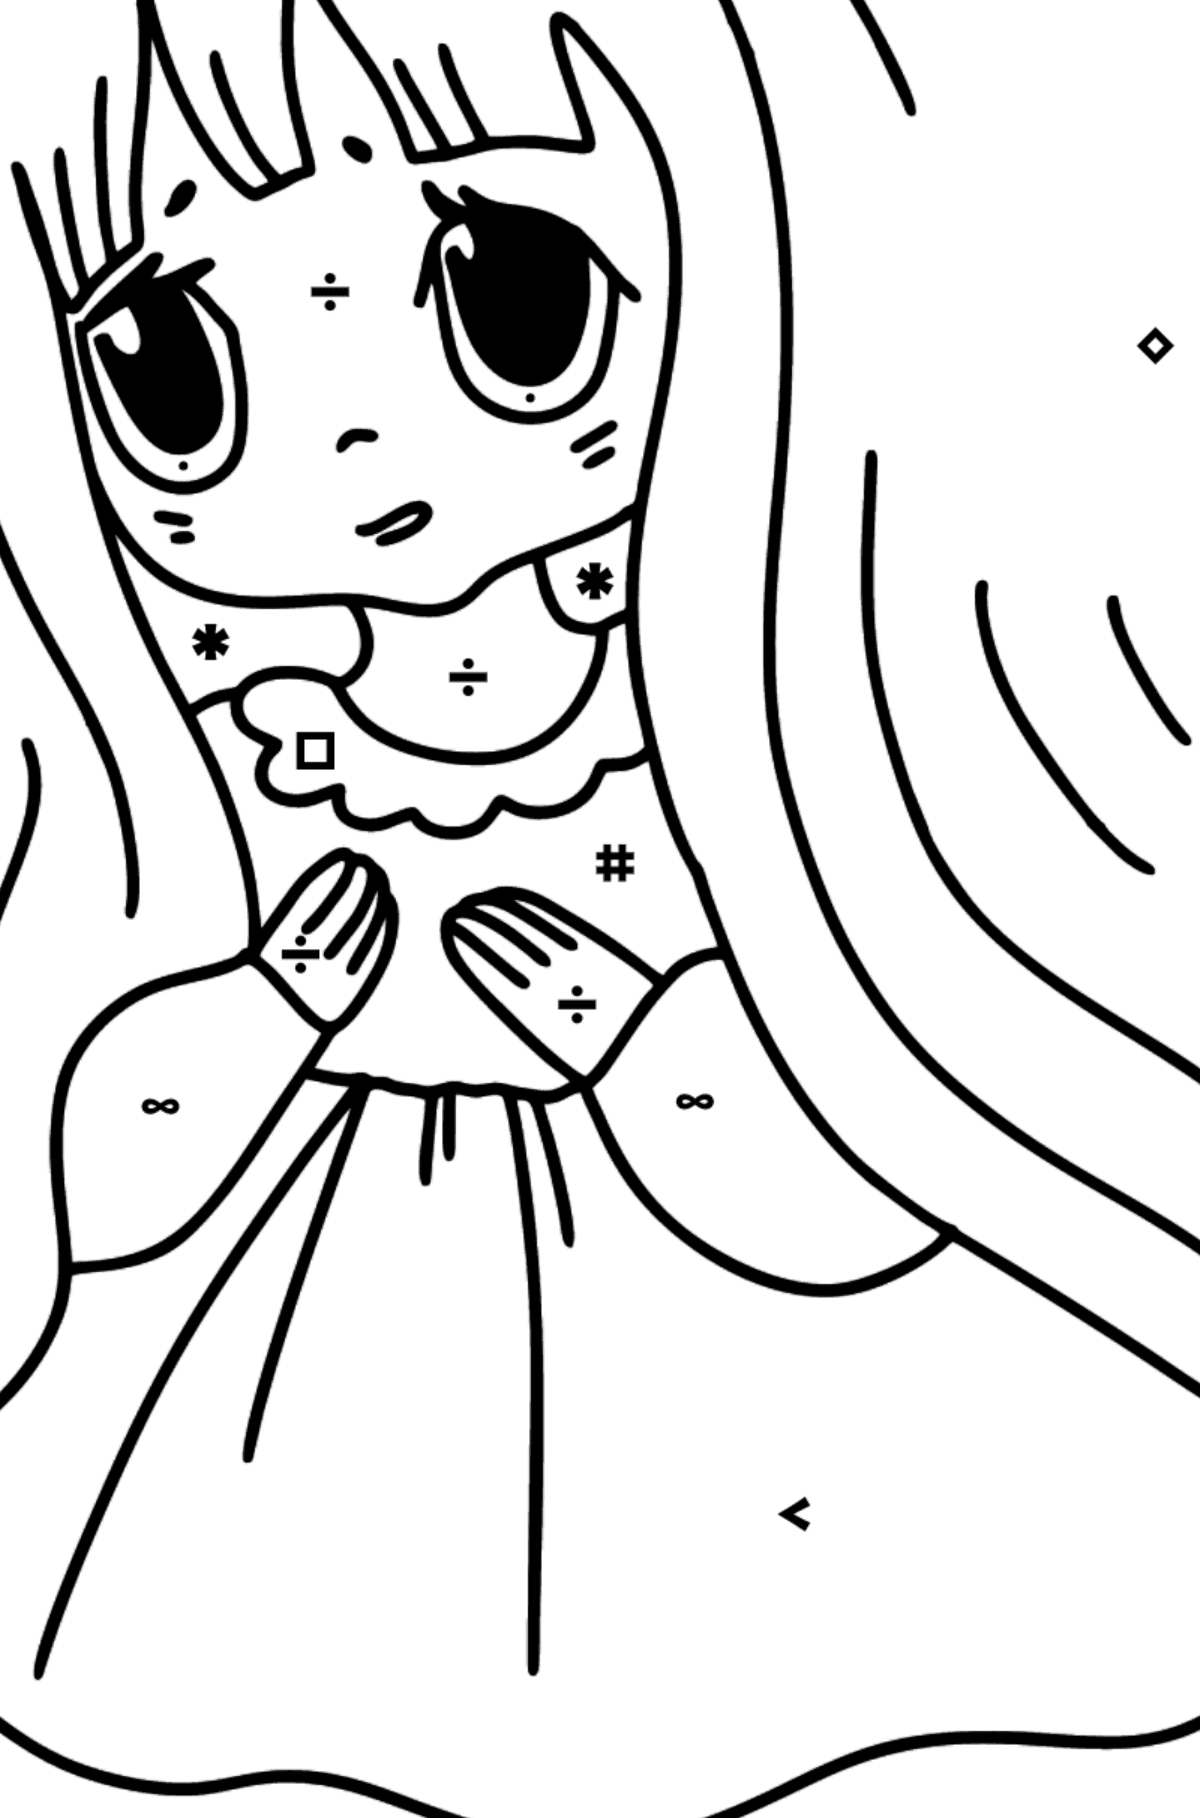 Anime Sad Girl Coloring Pages - Coloring by Symbols for Kids